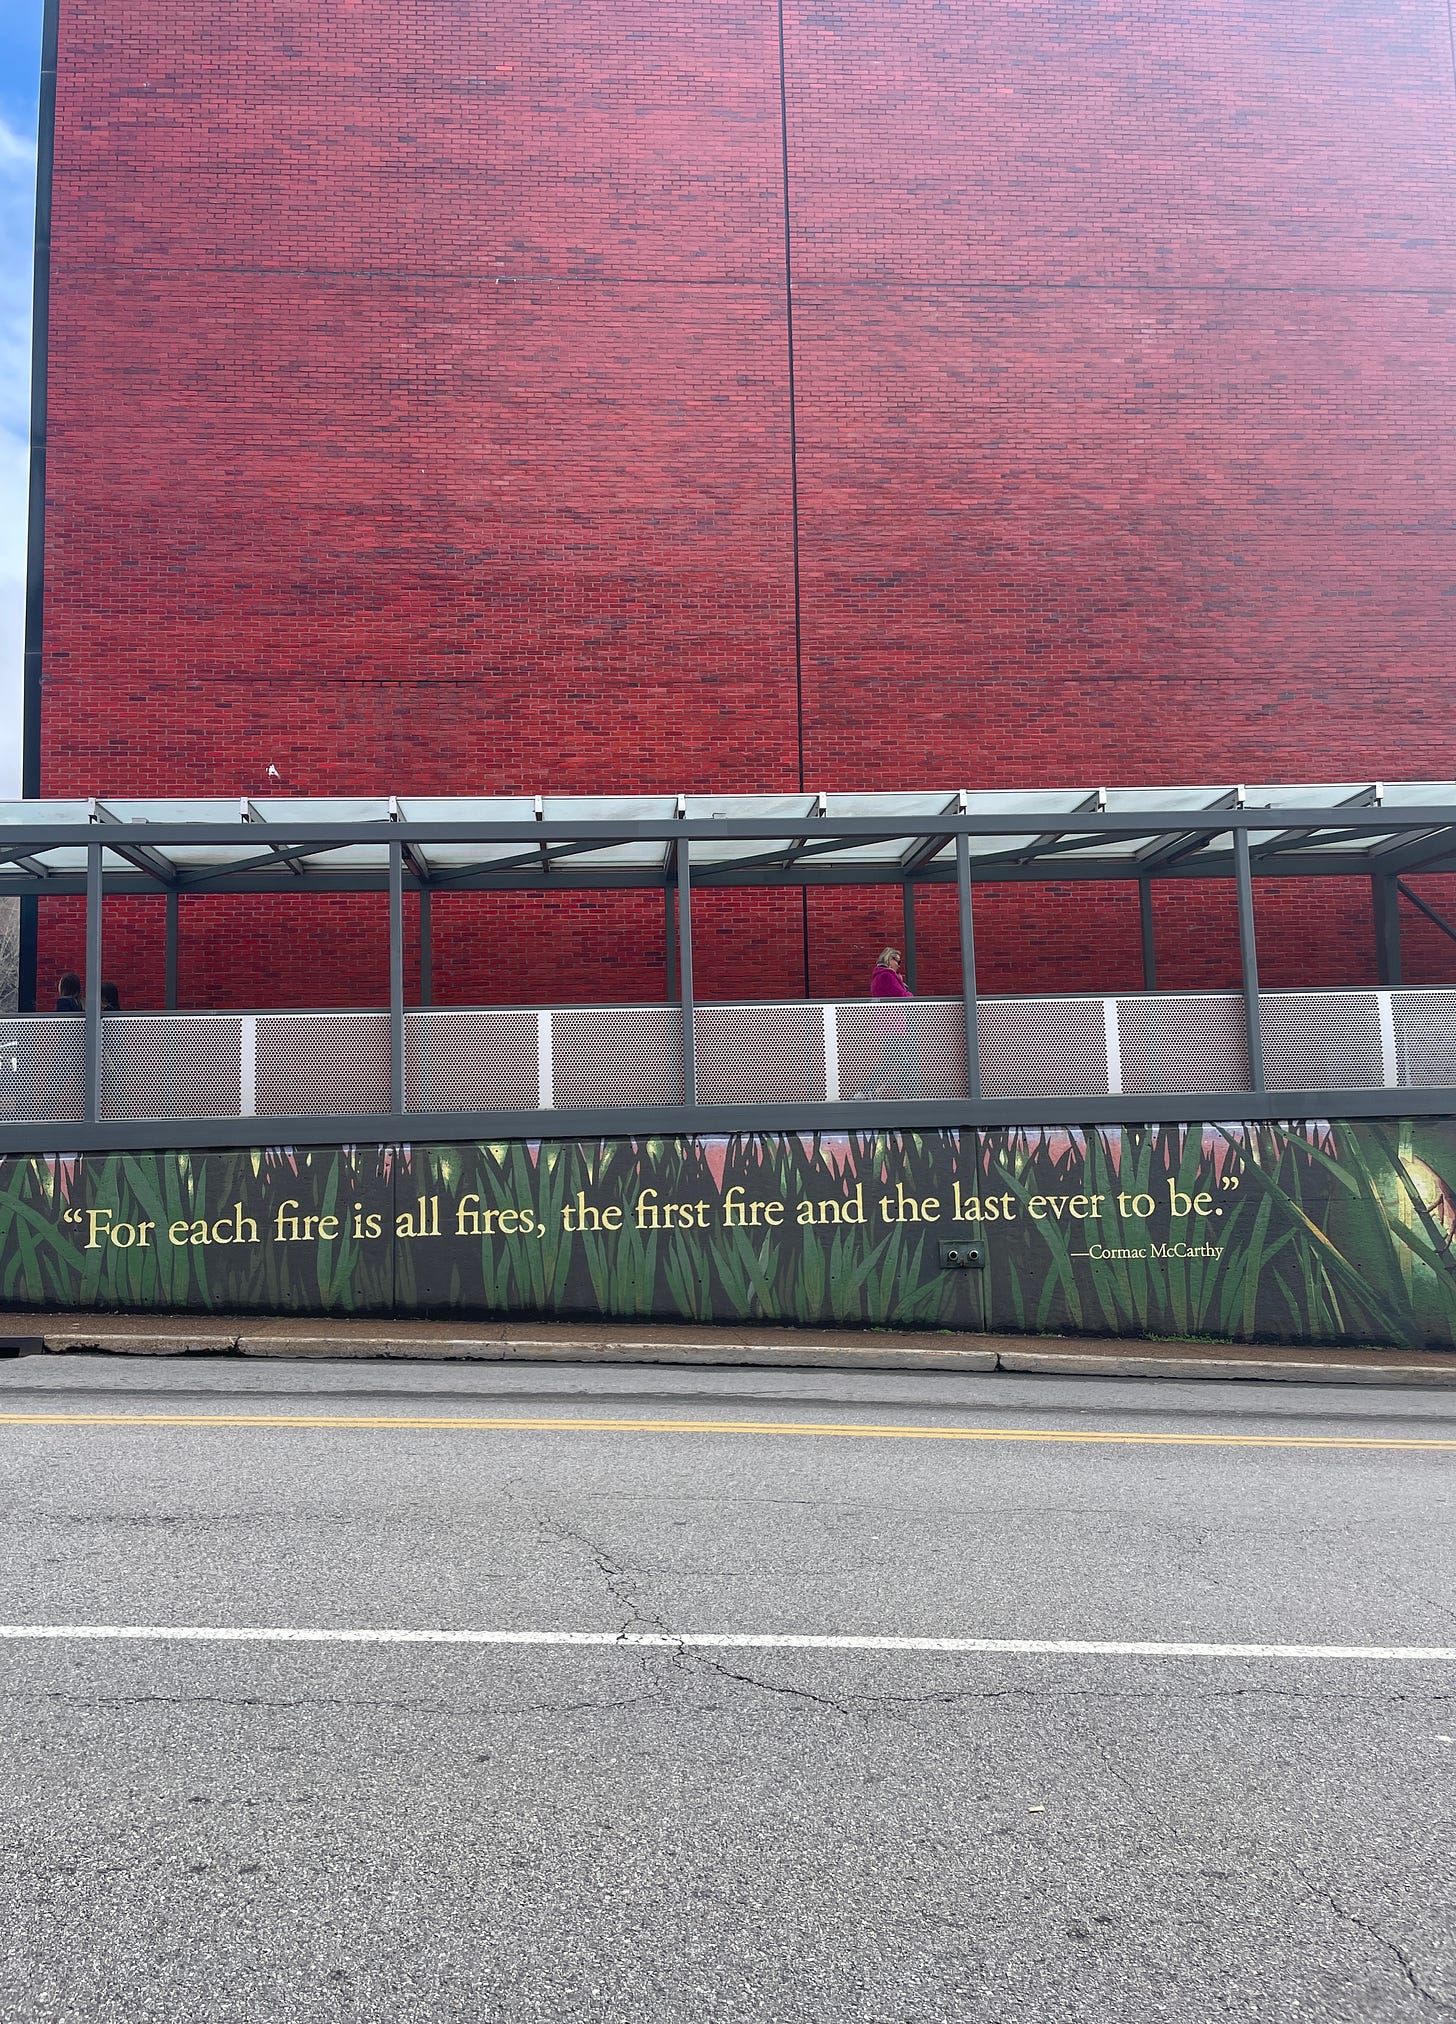 Mural with the quote "For each fire is all fires, the first fire and the last ever to be" by Cormac McCarthy